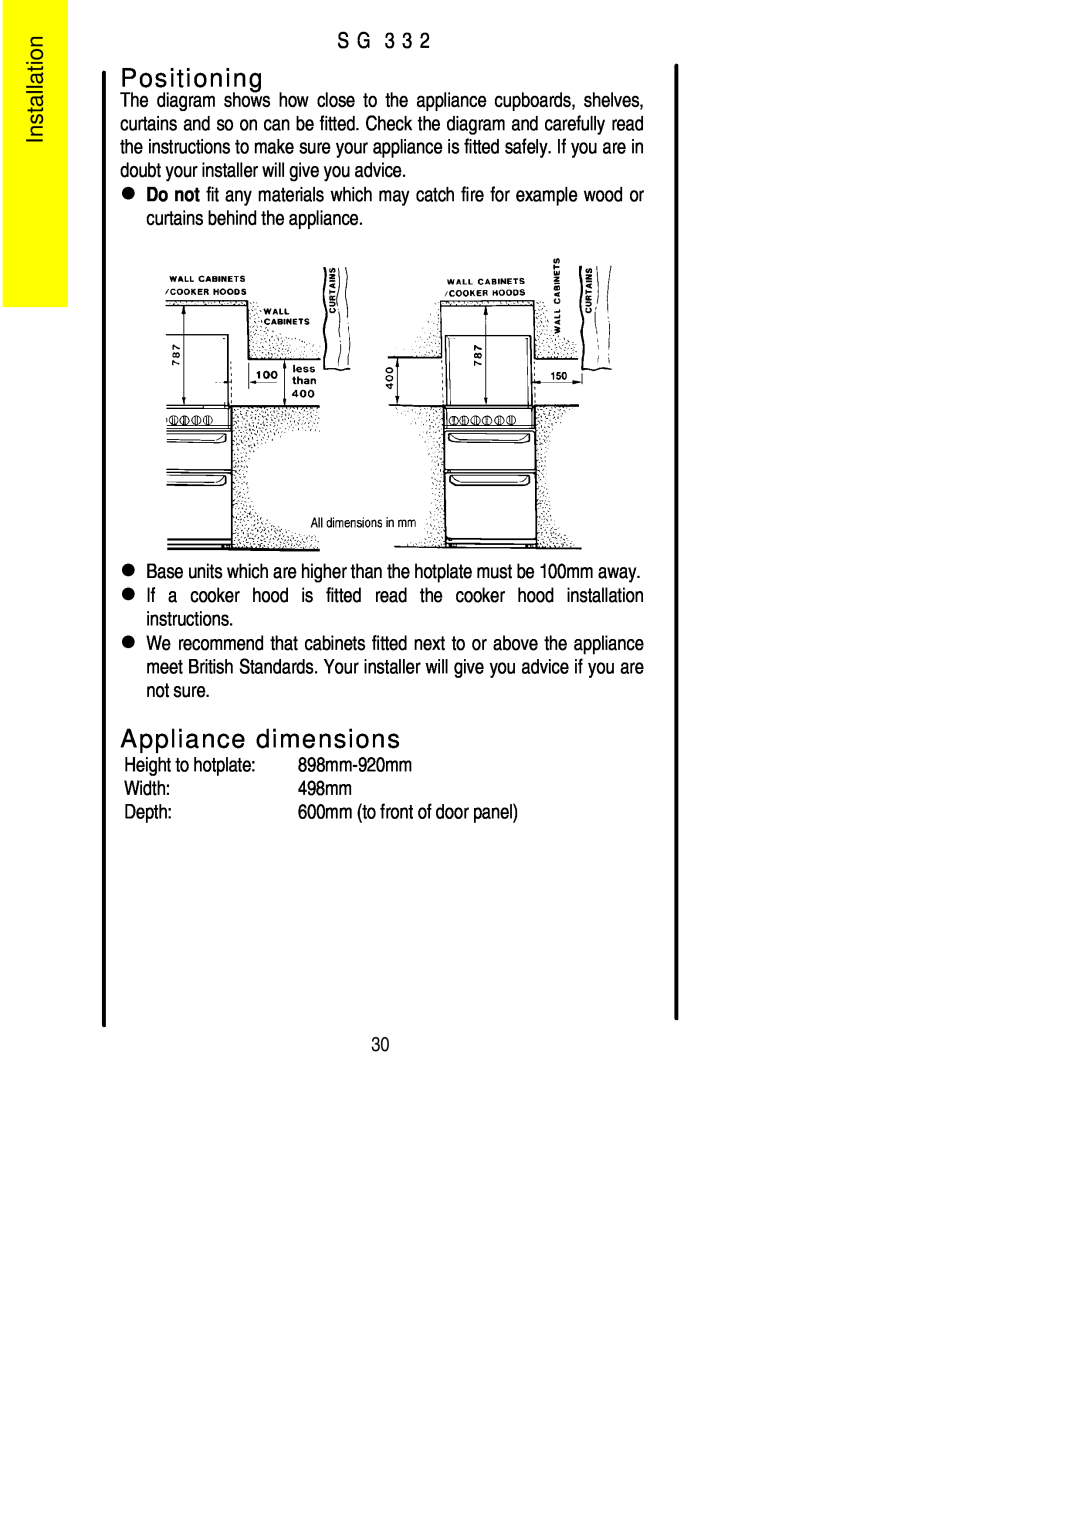 Electrolux SG 332 installation instructions Positioning, Appliance dimensions, Installation, S G 